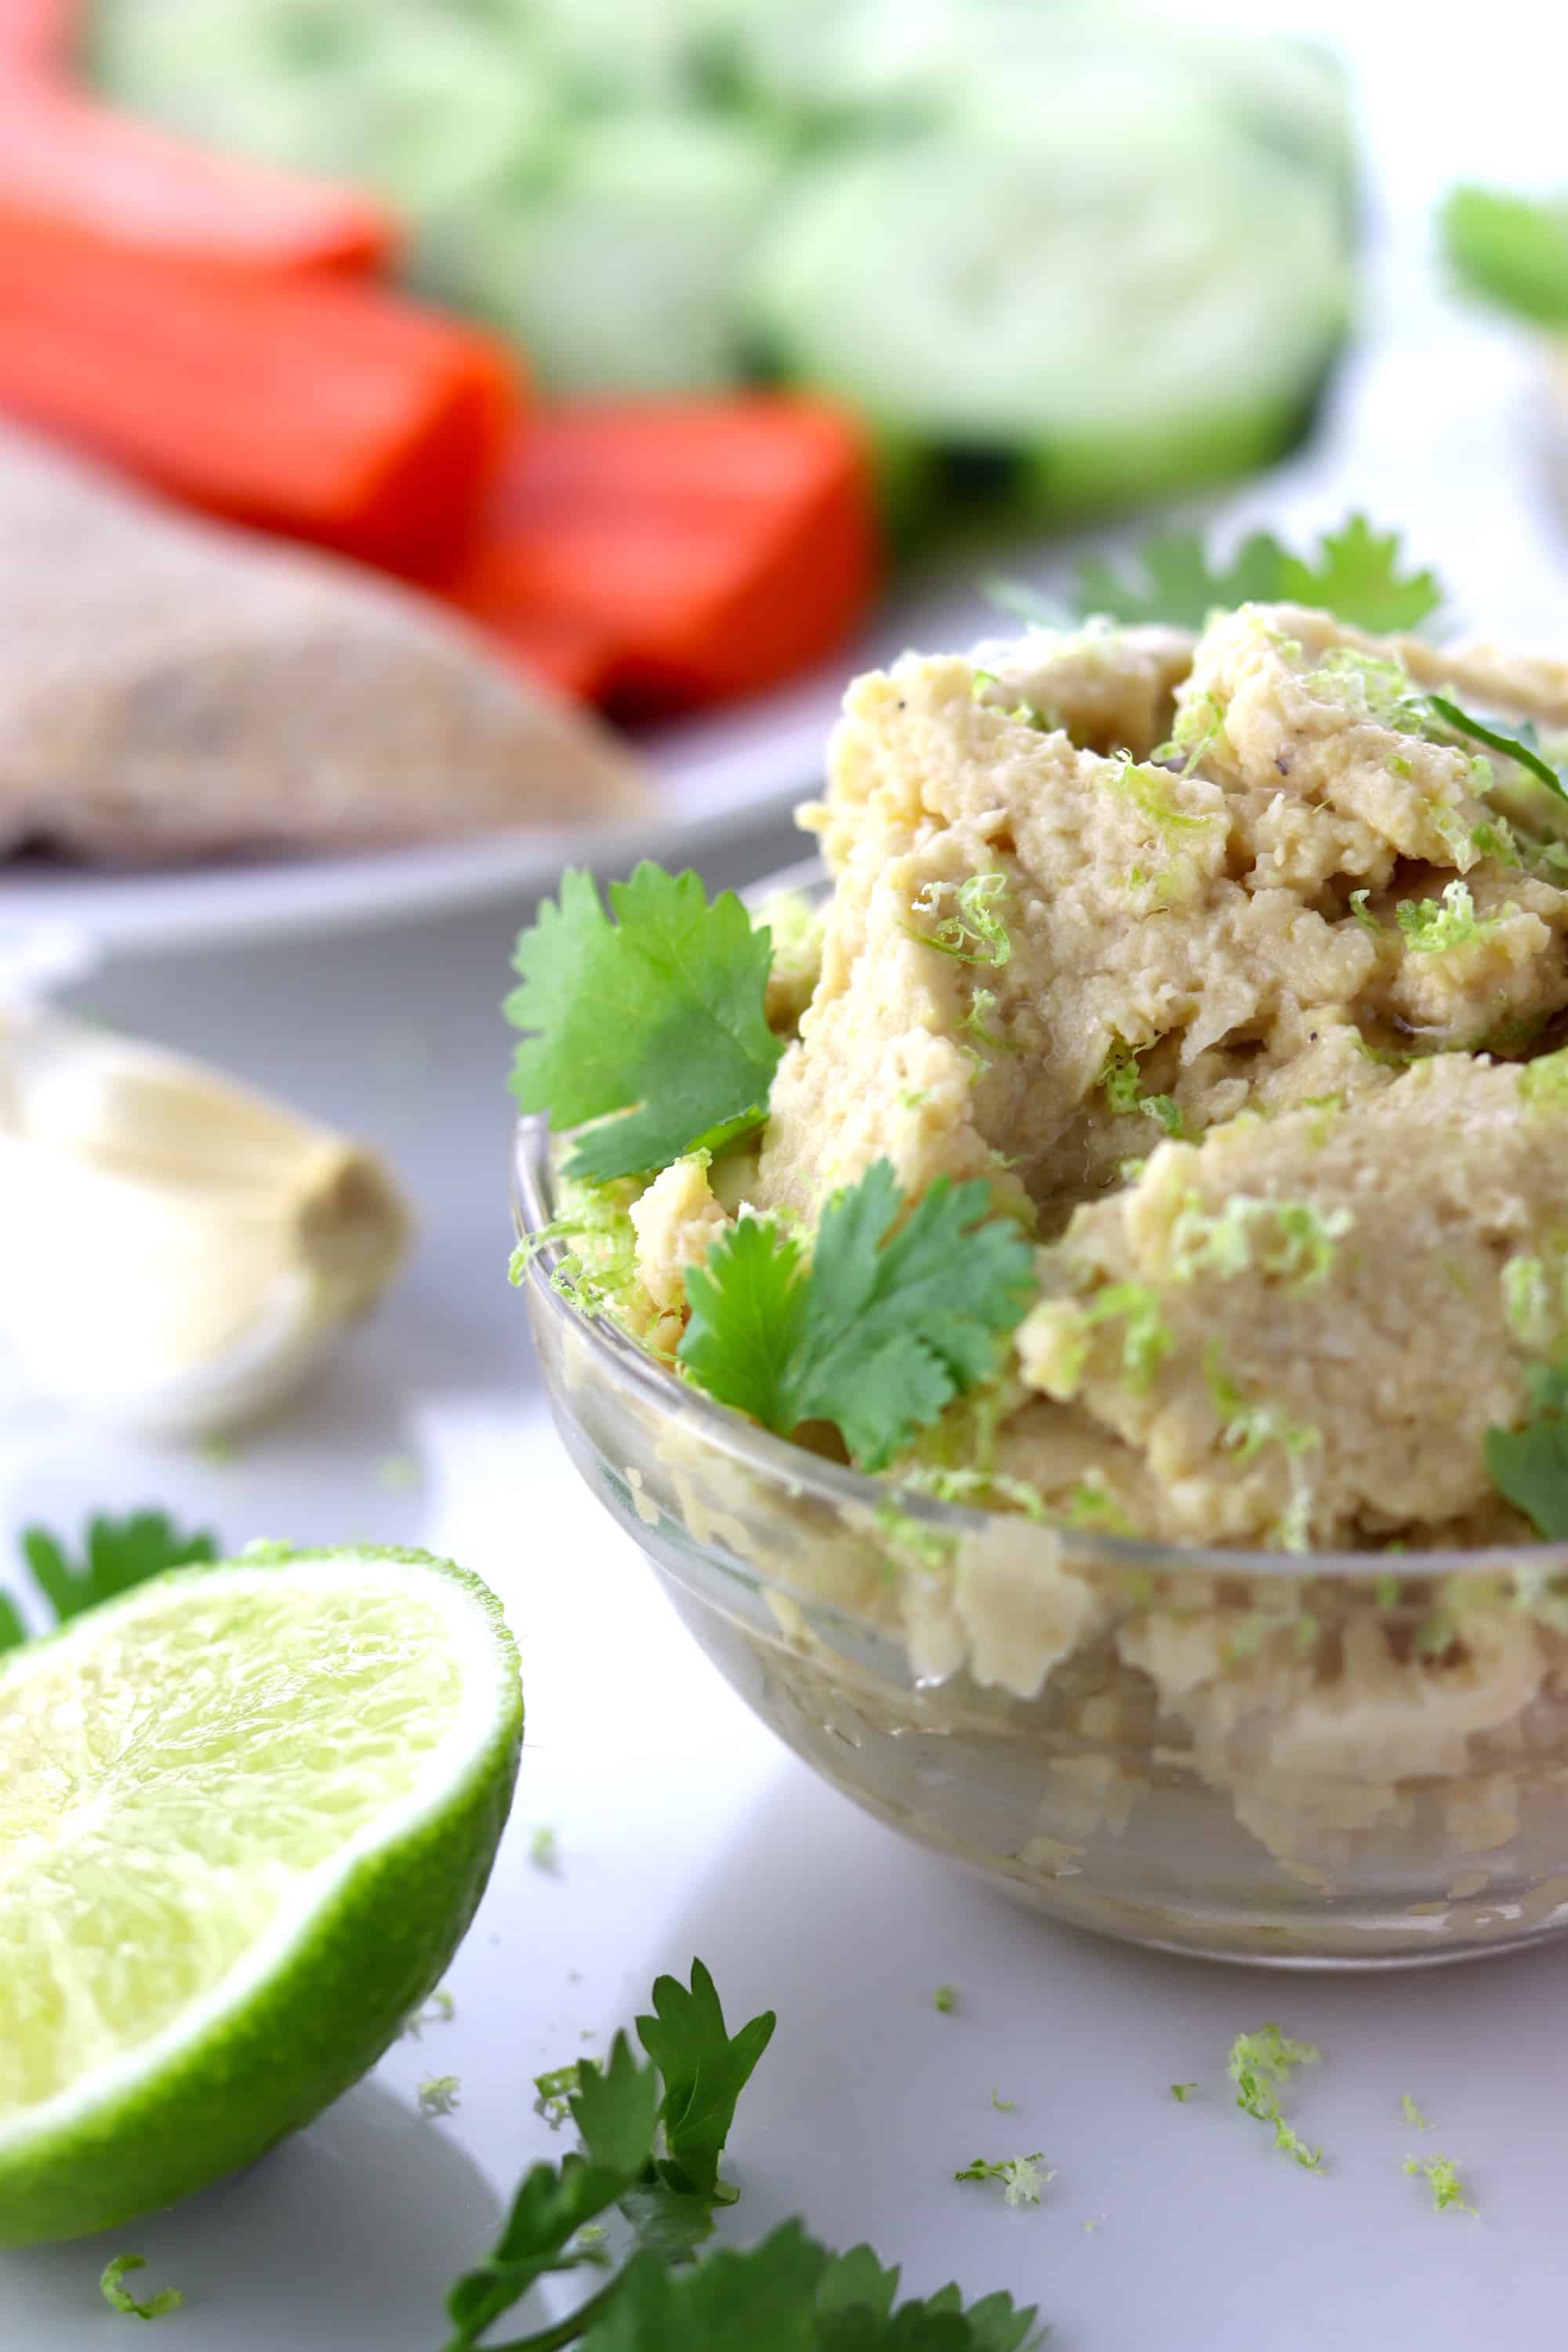 Simple roasted garlic and lime hummus in a dish with veggies and pita